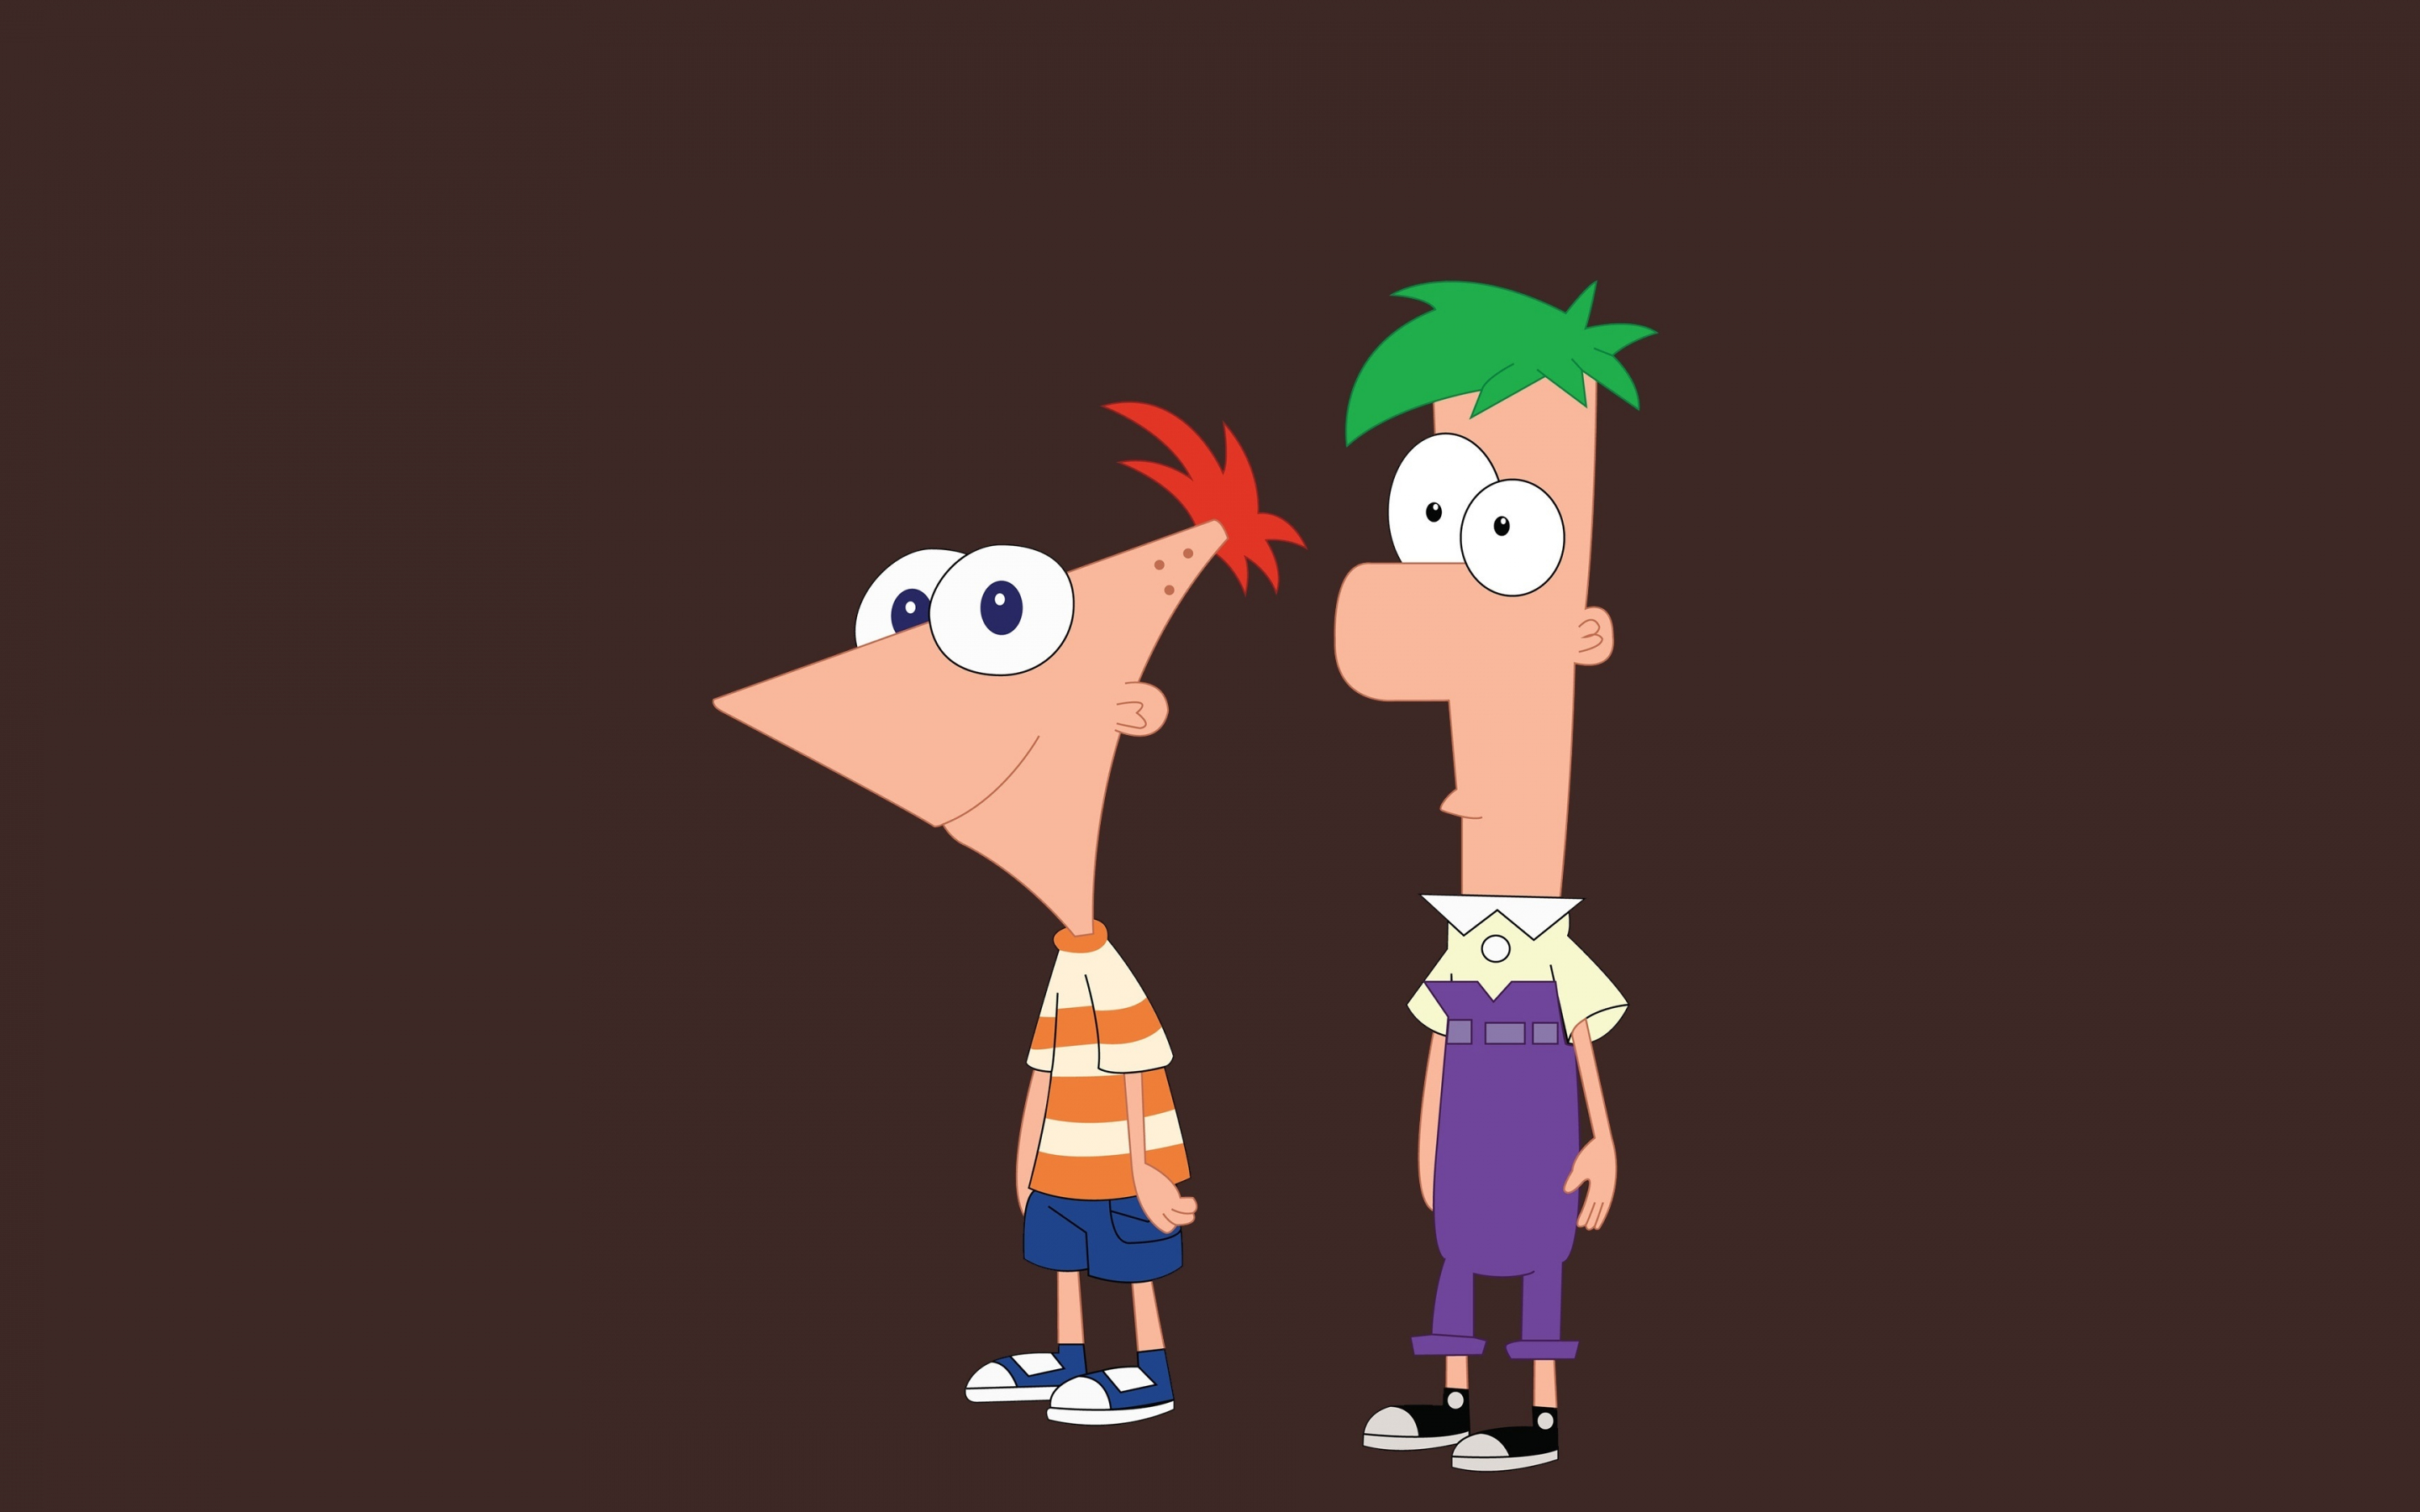 Phineas and Ferb, animated, minimal, tv show, 2880x1800 wallpaper